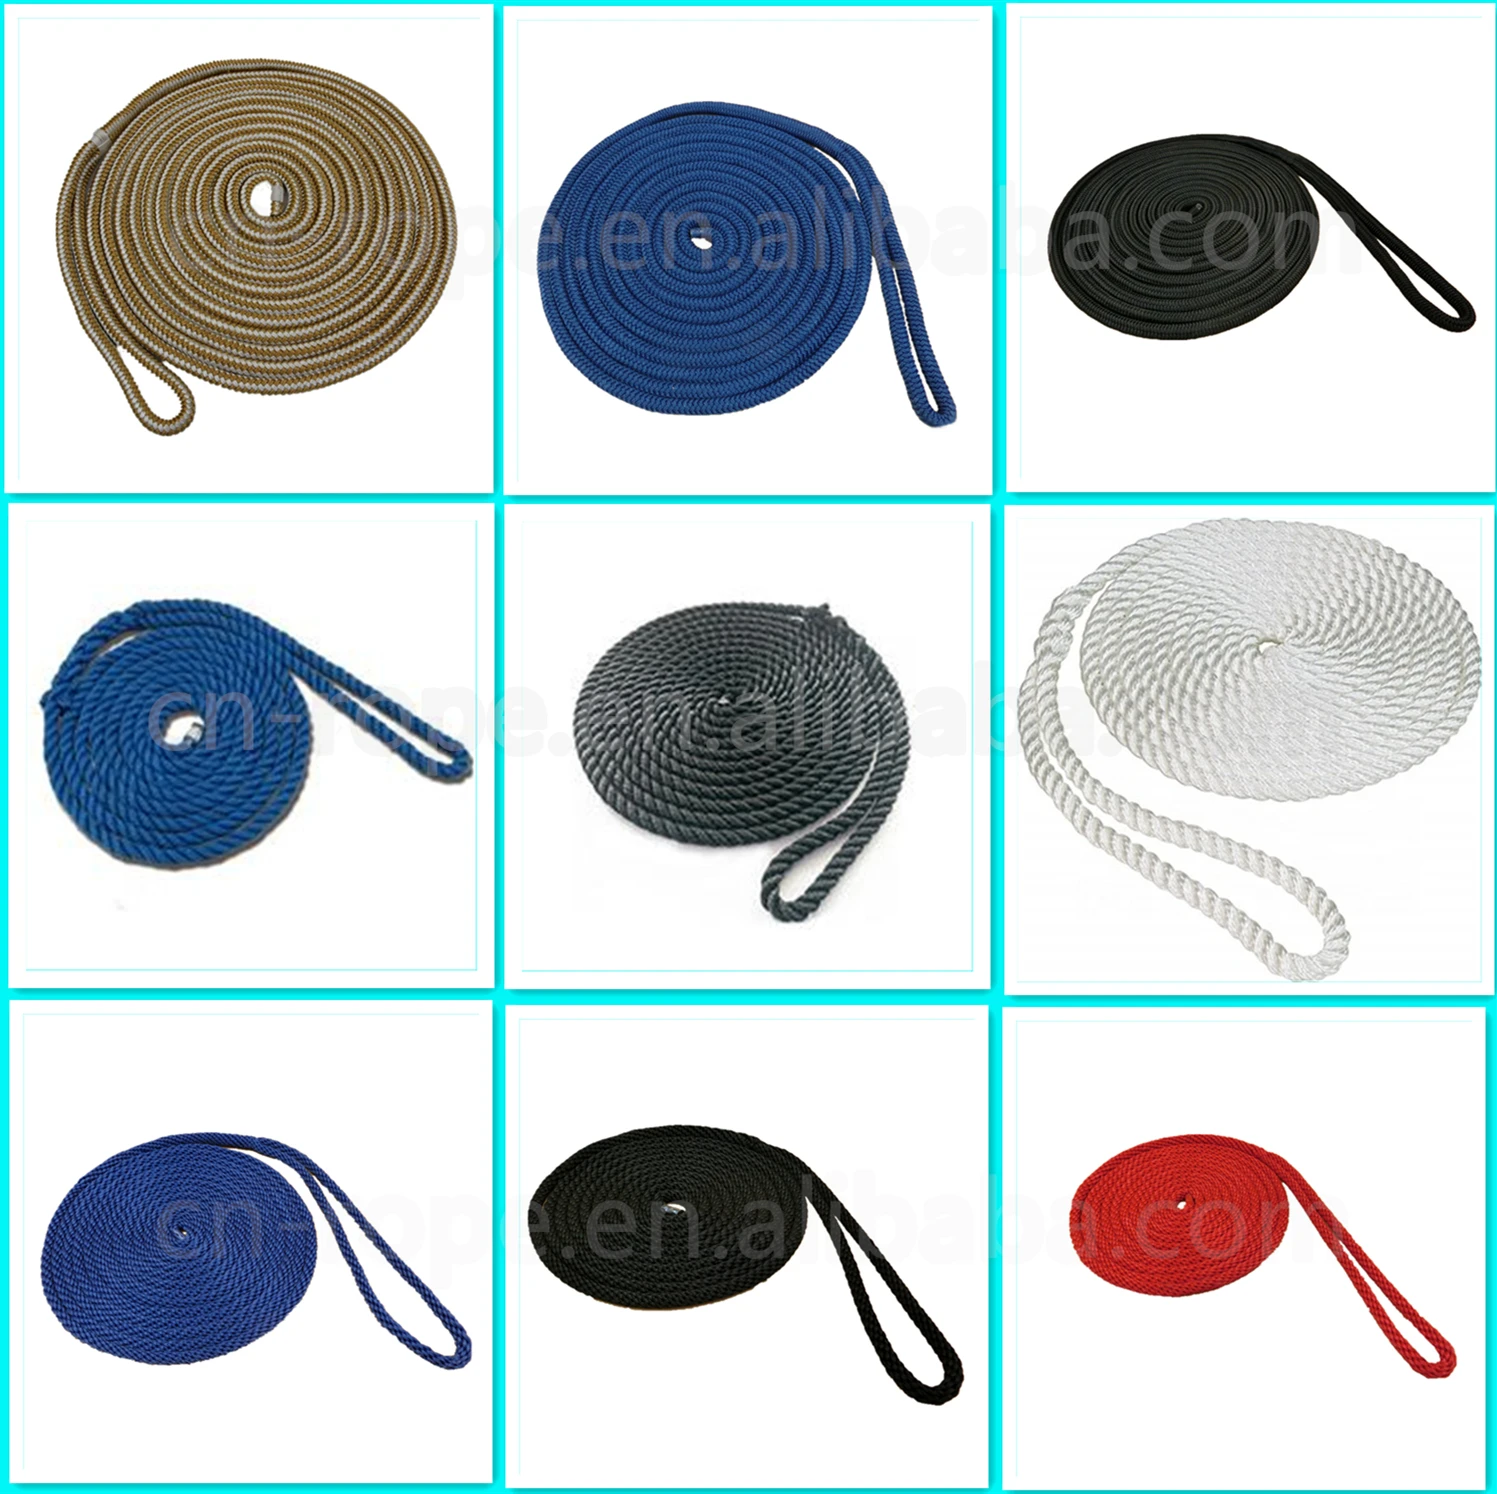 High Quality W&G Marine Rope Nylon Polyester PP Double Braided Dock Line